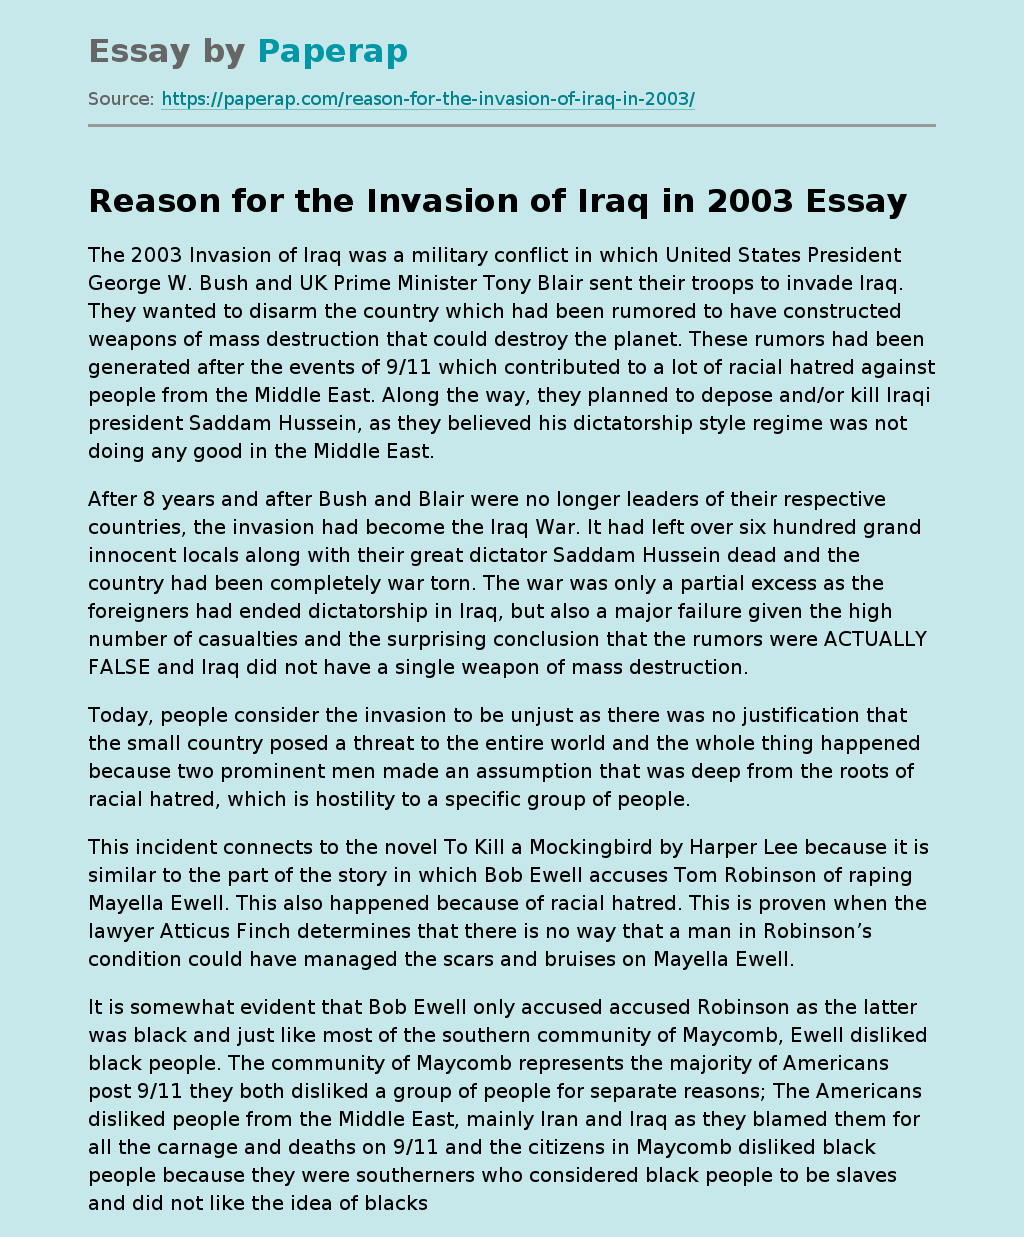 Reason for the Invasion of Iraq in 2003